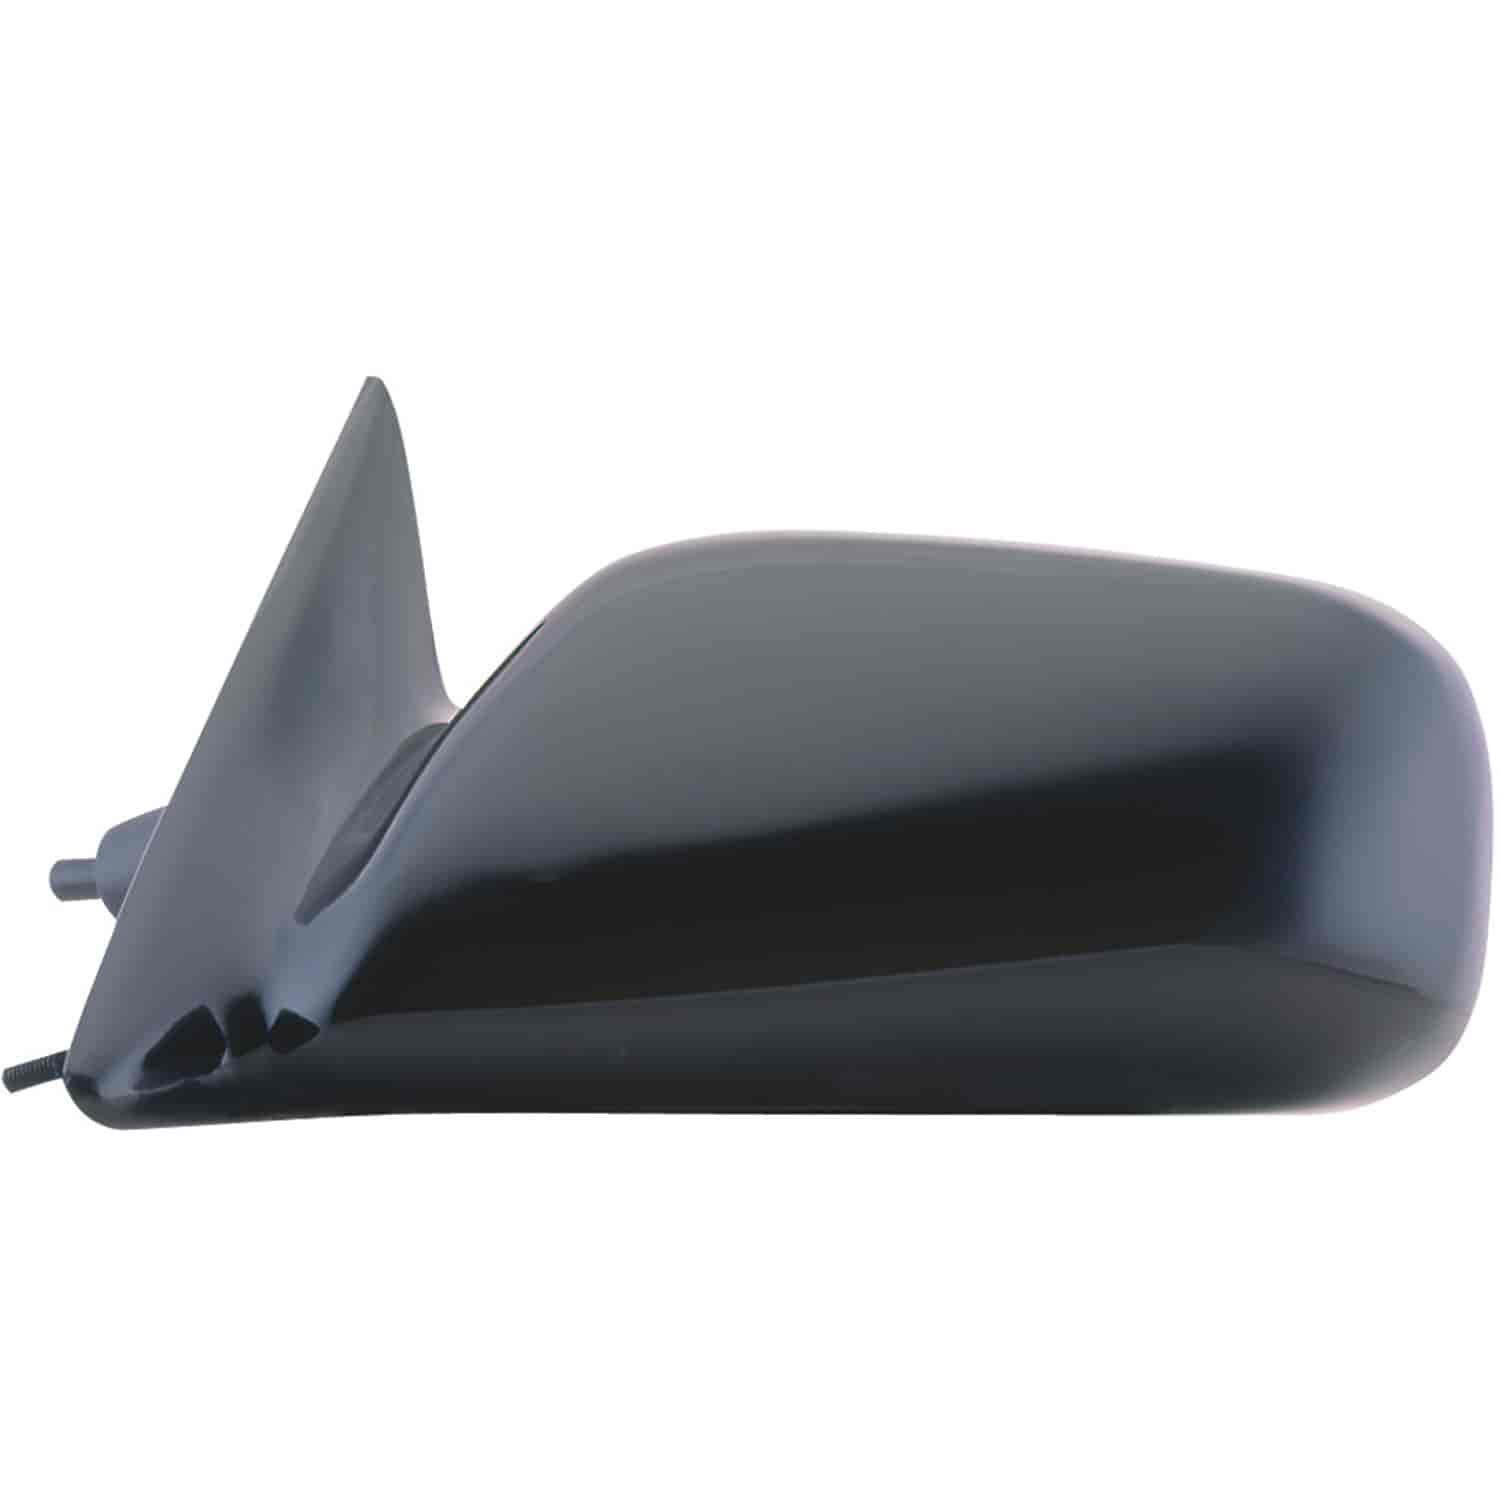 OEM Style Replacement mirror for 97-01 Toyota Camry US built ; Toyota Camry Japan built driver side